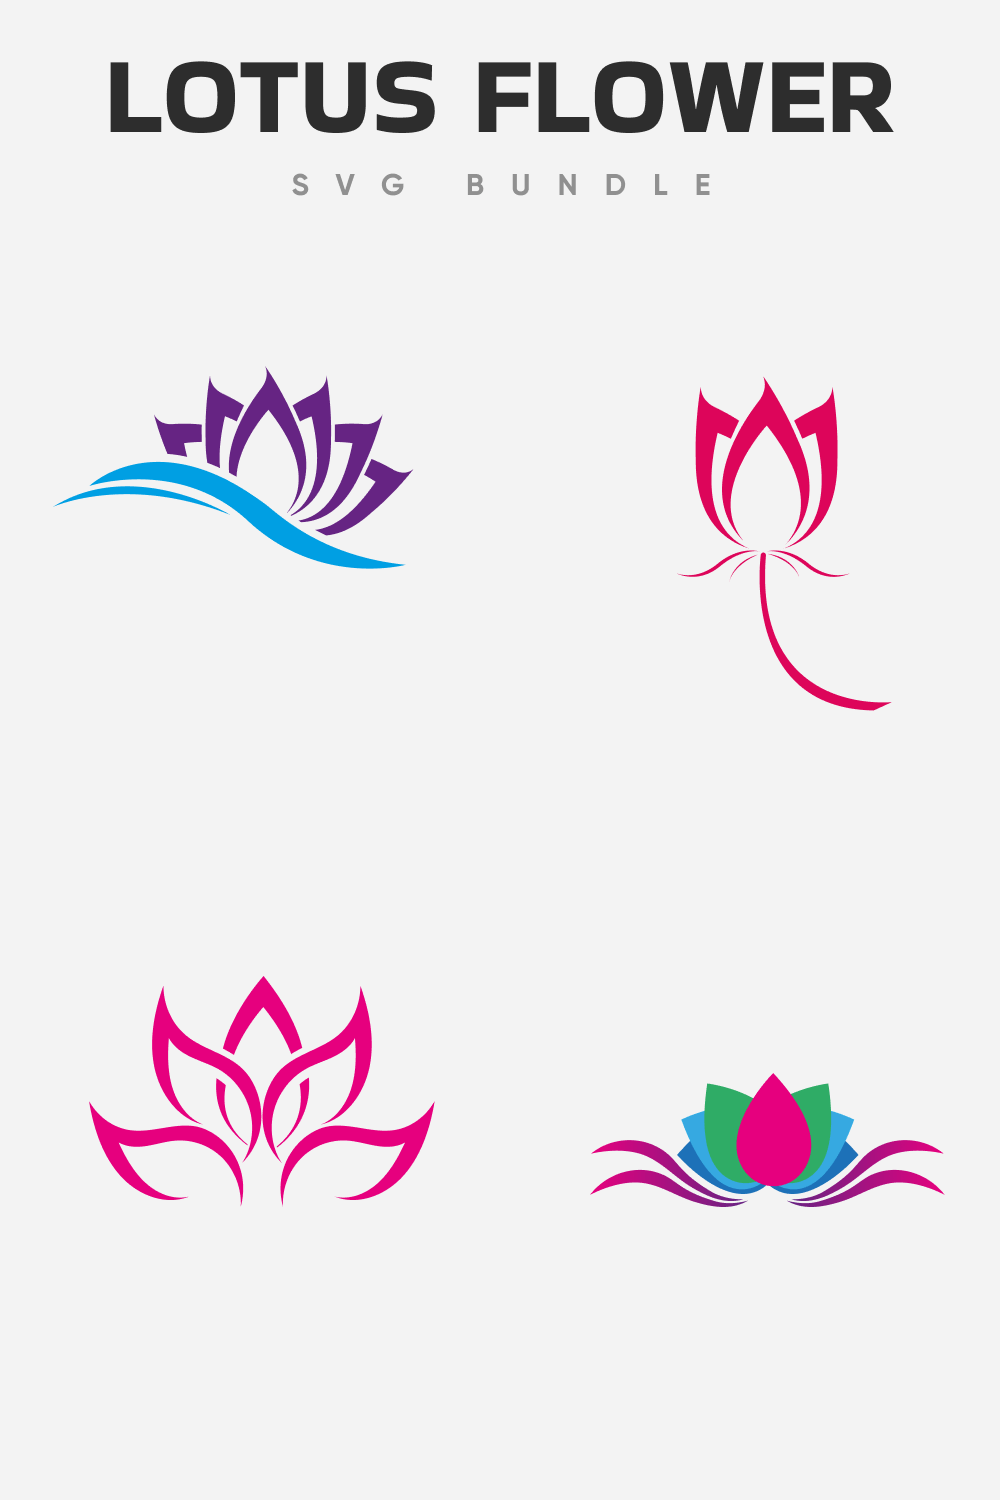 Different forms of creating a magical lotus flower.